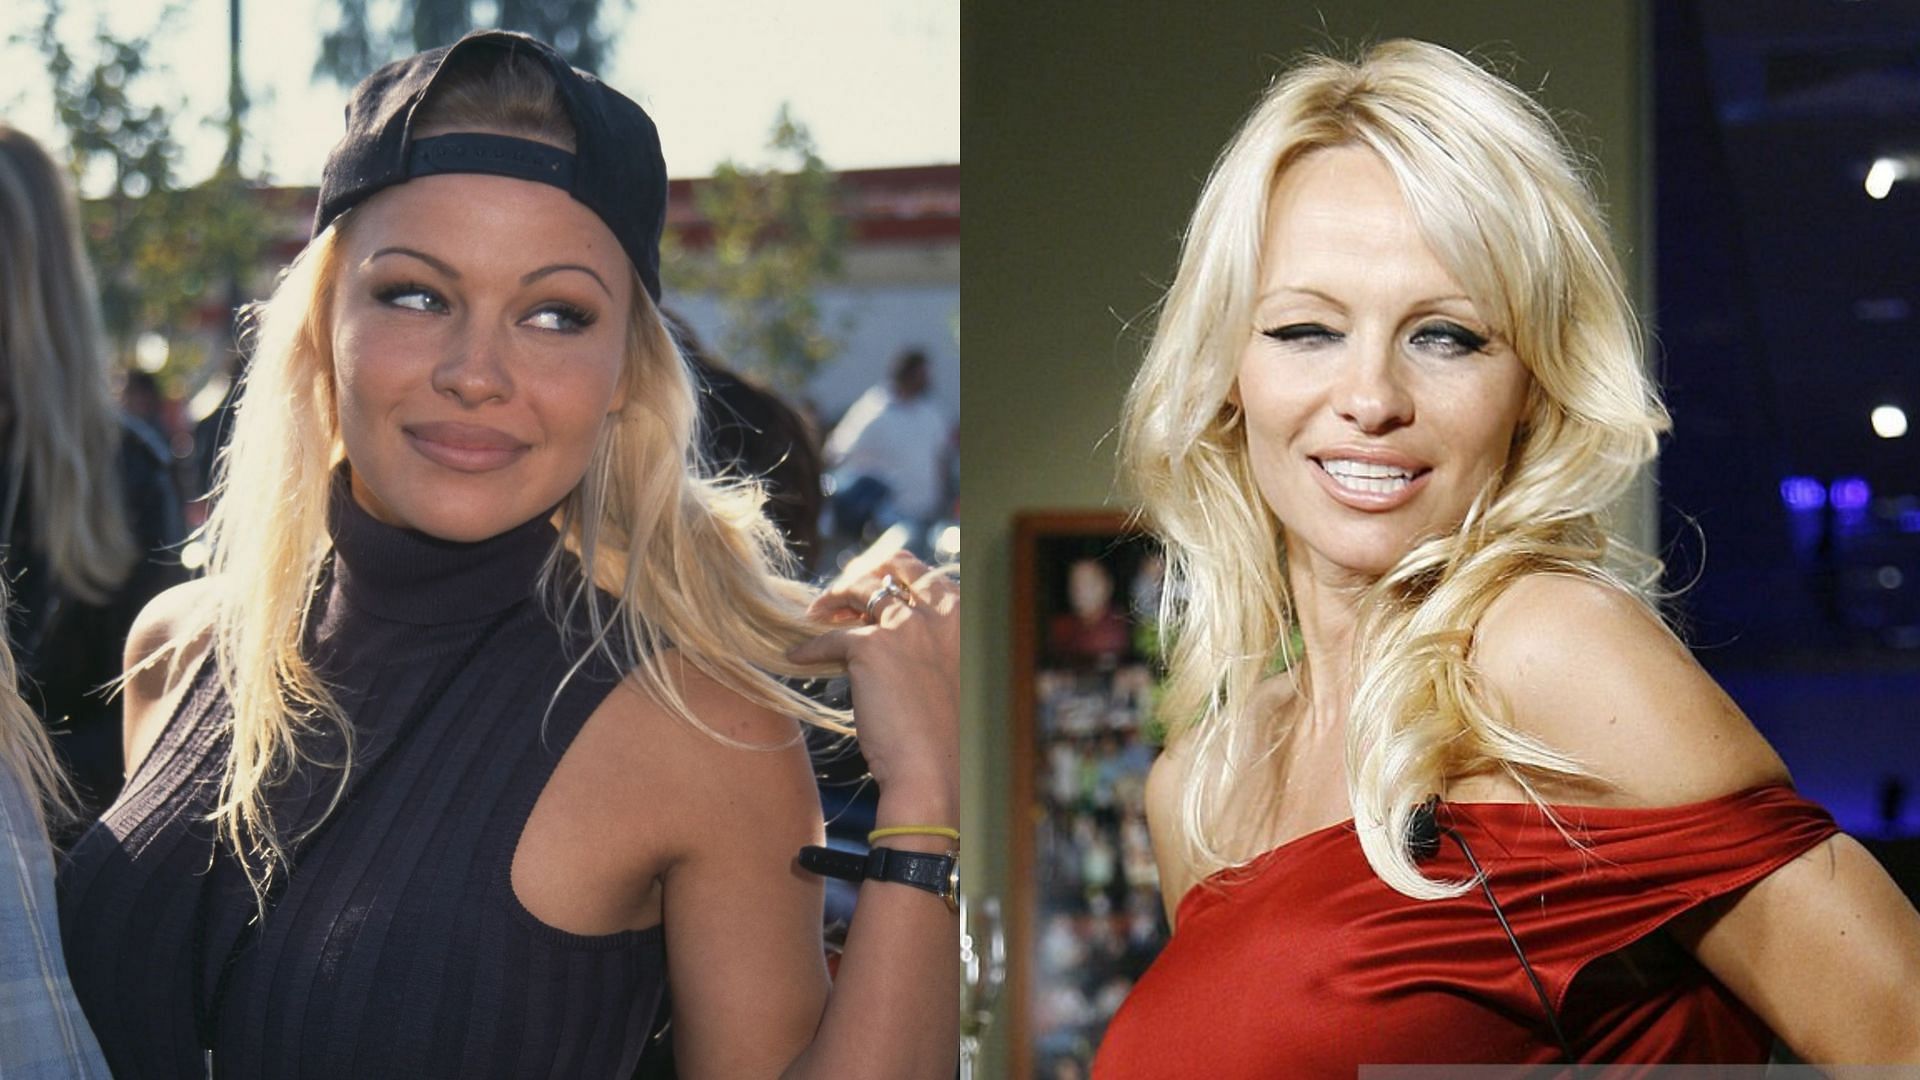 Pamela Anderson previously appeared on WWE TV